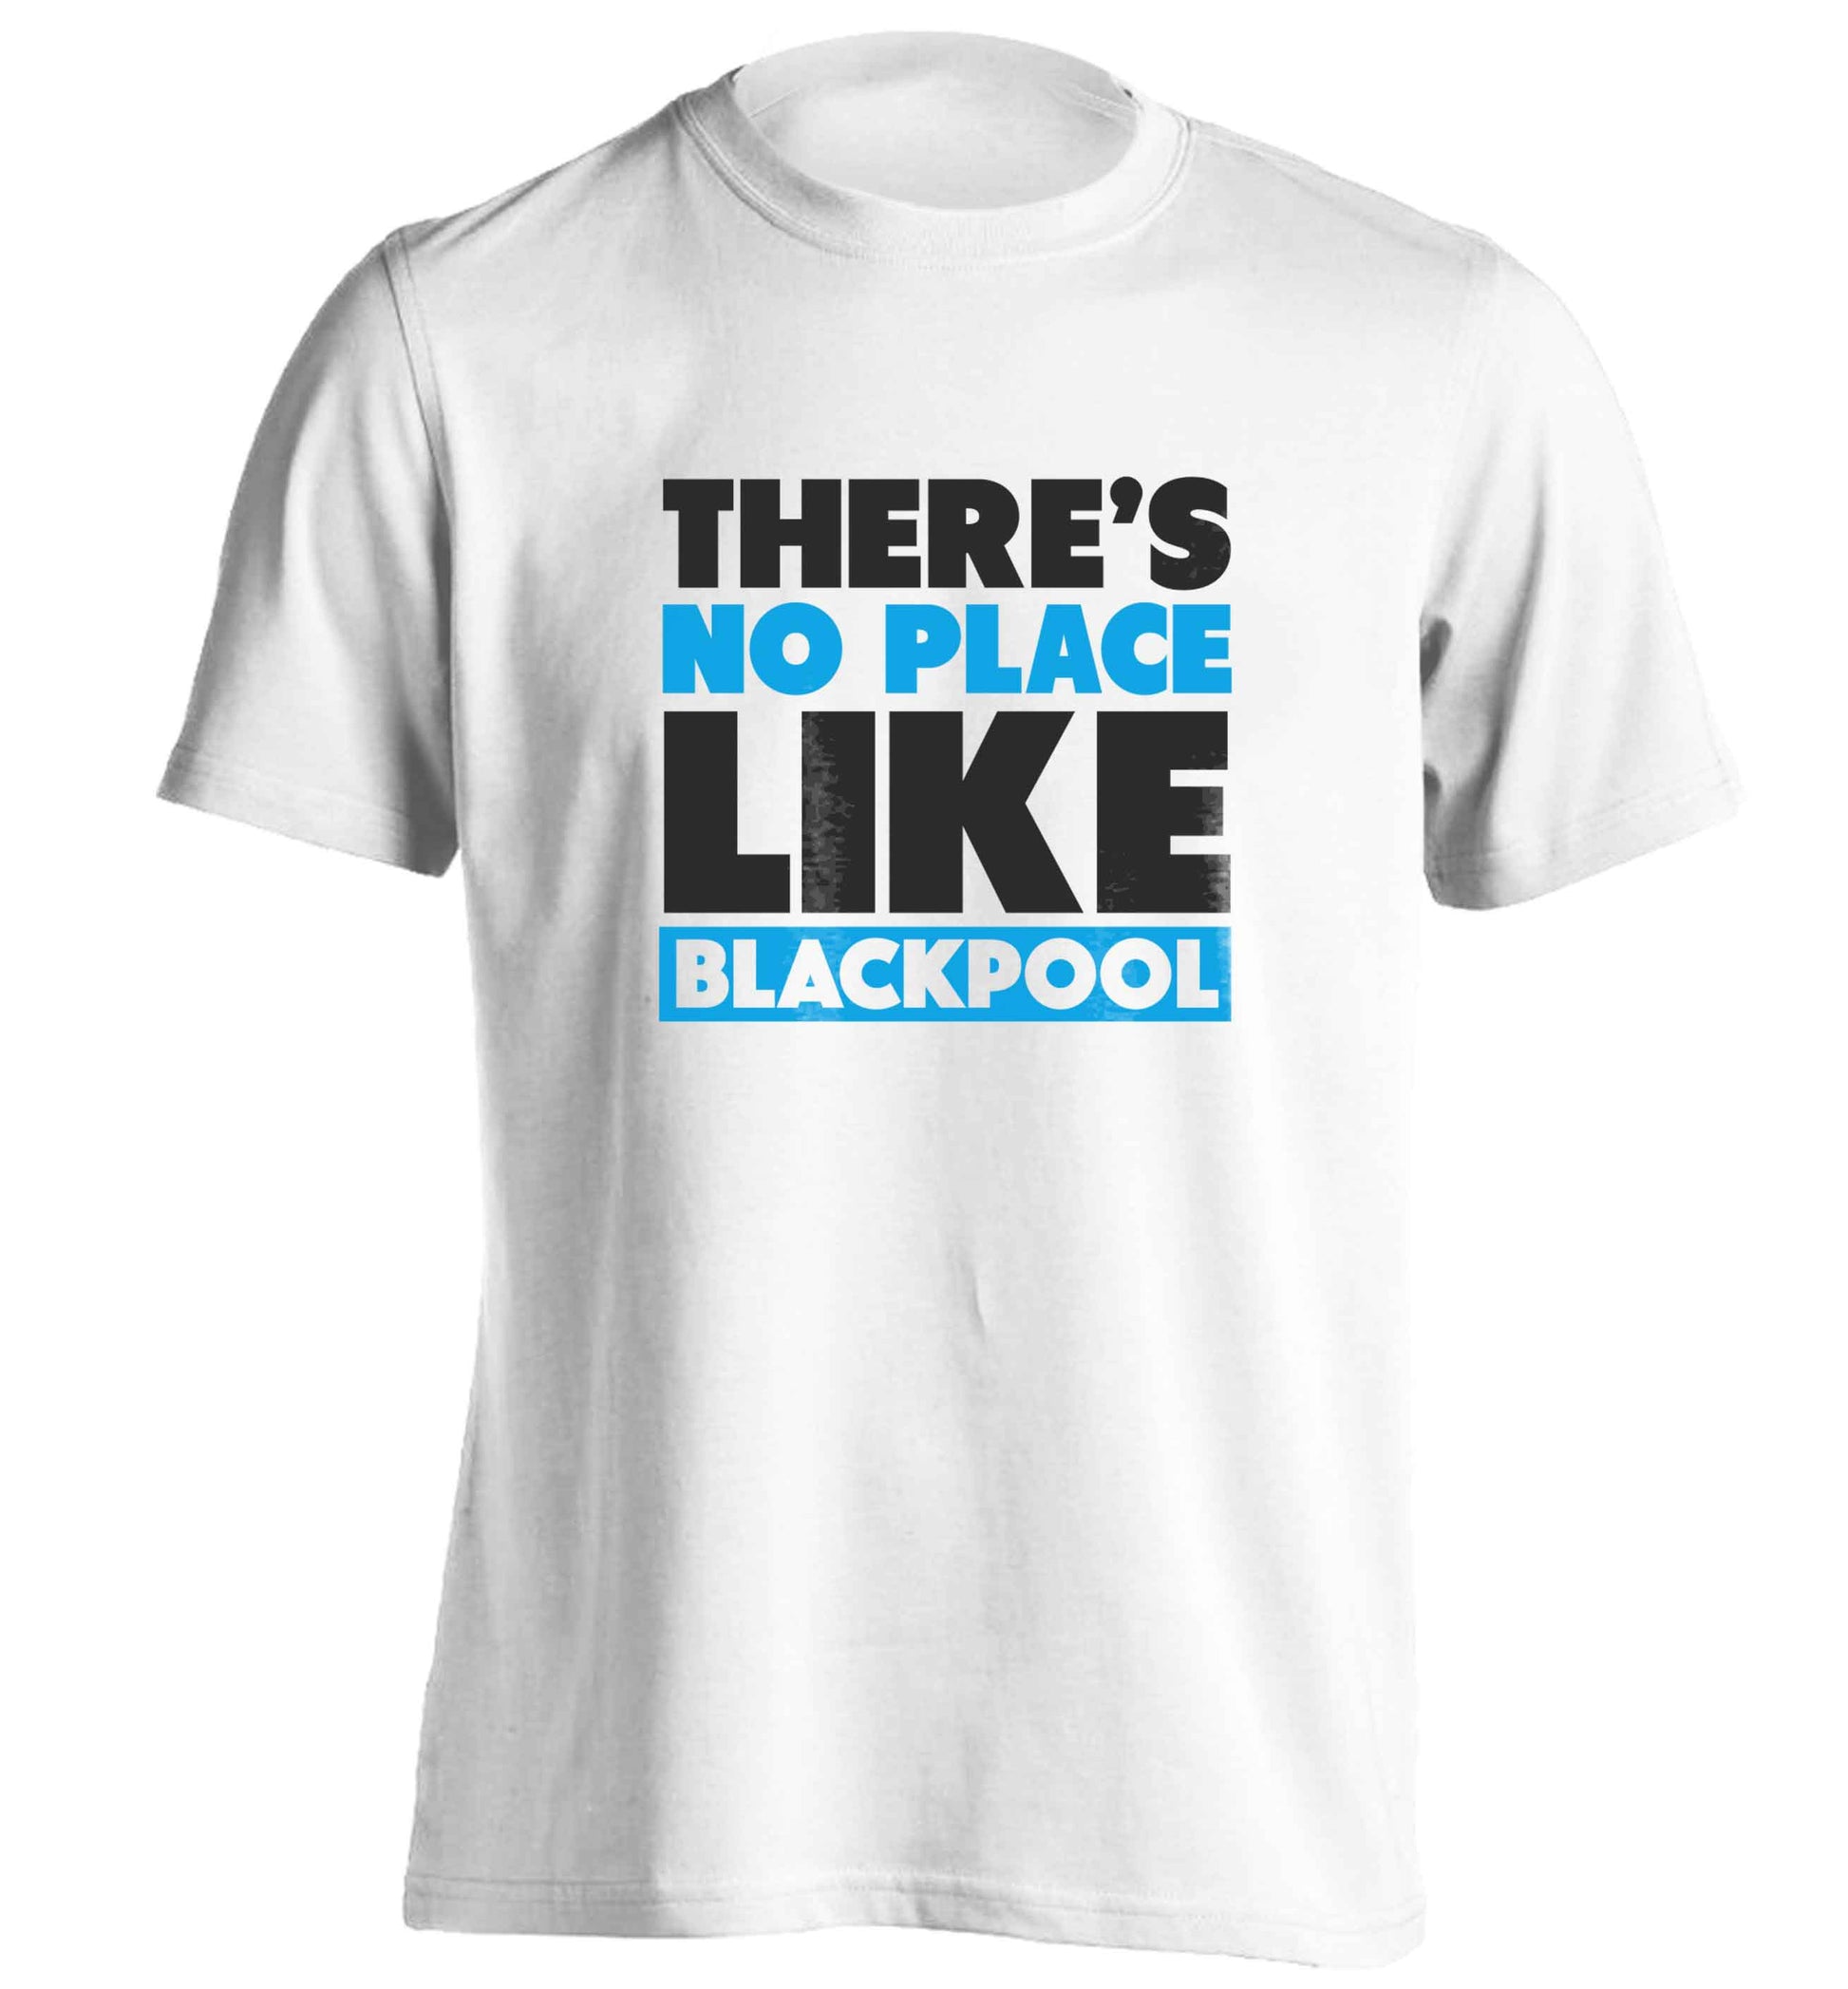 There's no place like Blackpool adults unisex white Tshirt 2XL